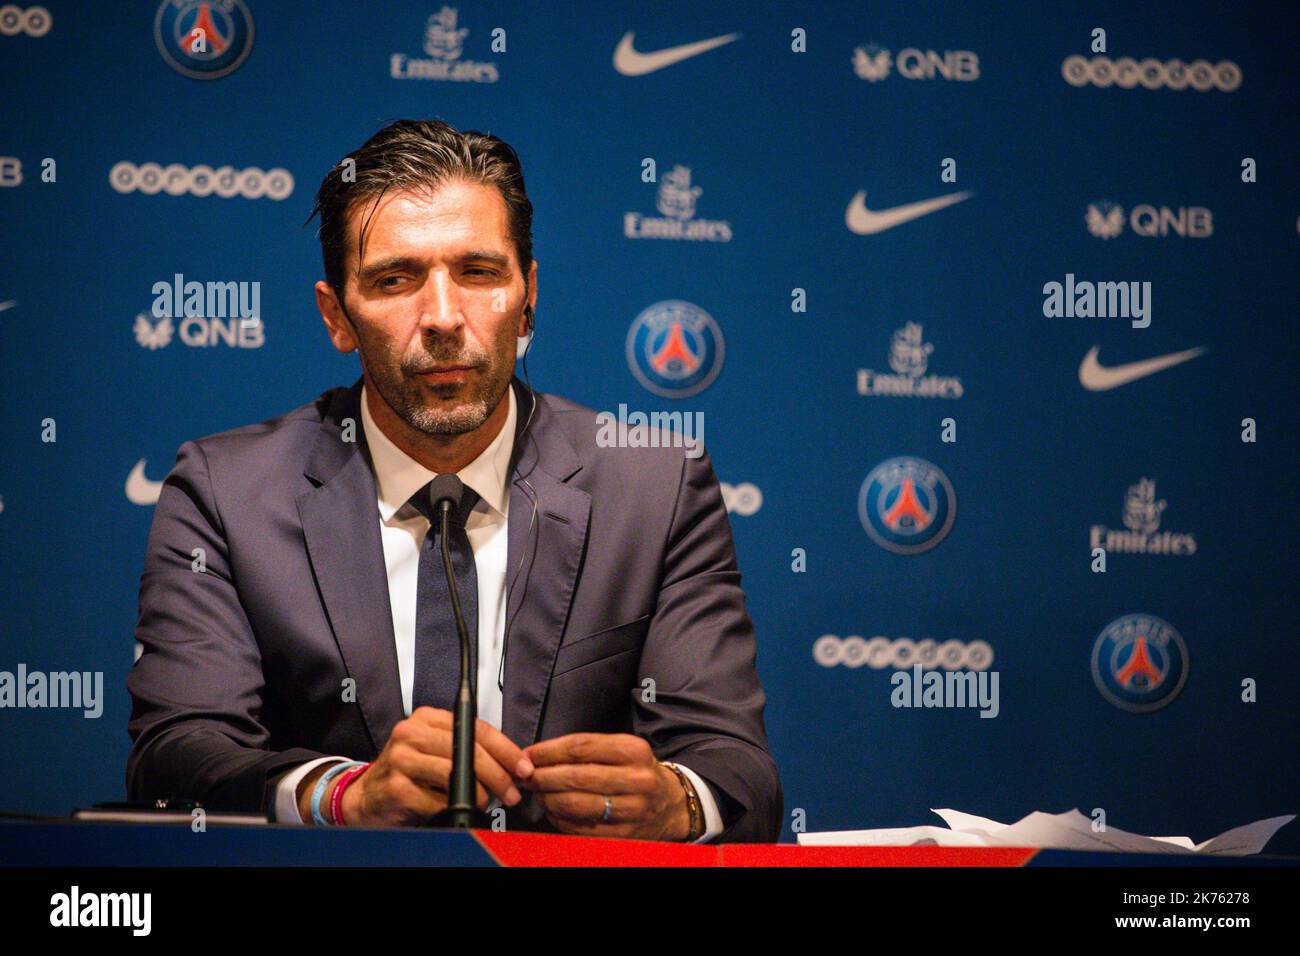 Press conference introducing the new player from Paris Saint Germain (PSG), former Juventus and Italian goalkeeper Gianluigi Buffon, in Paris, on July 9th, 2018.     Stock Photo